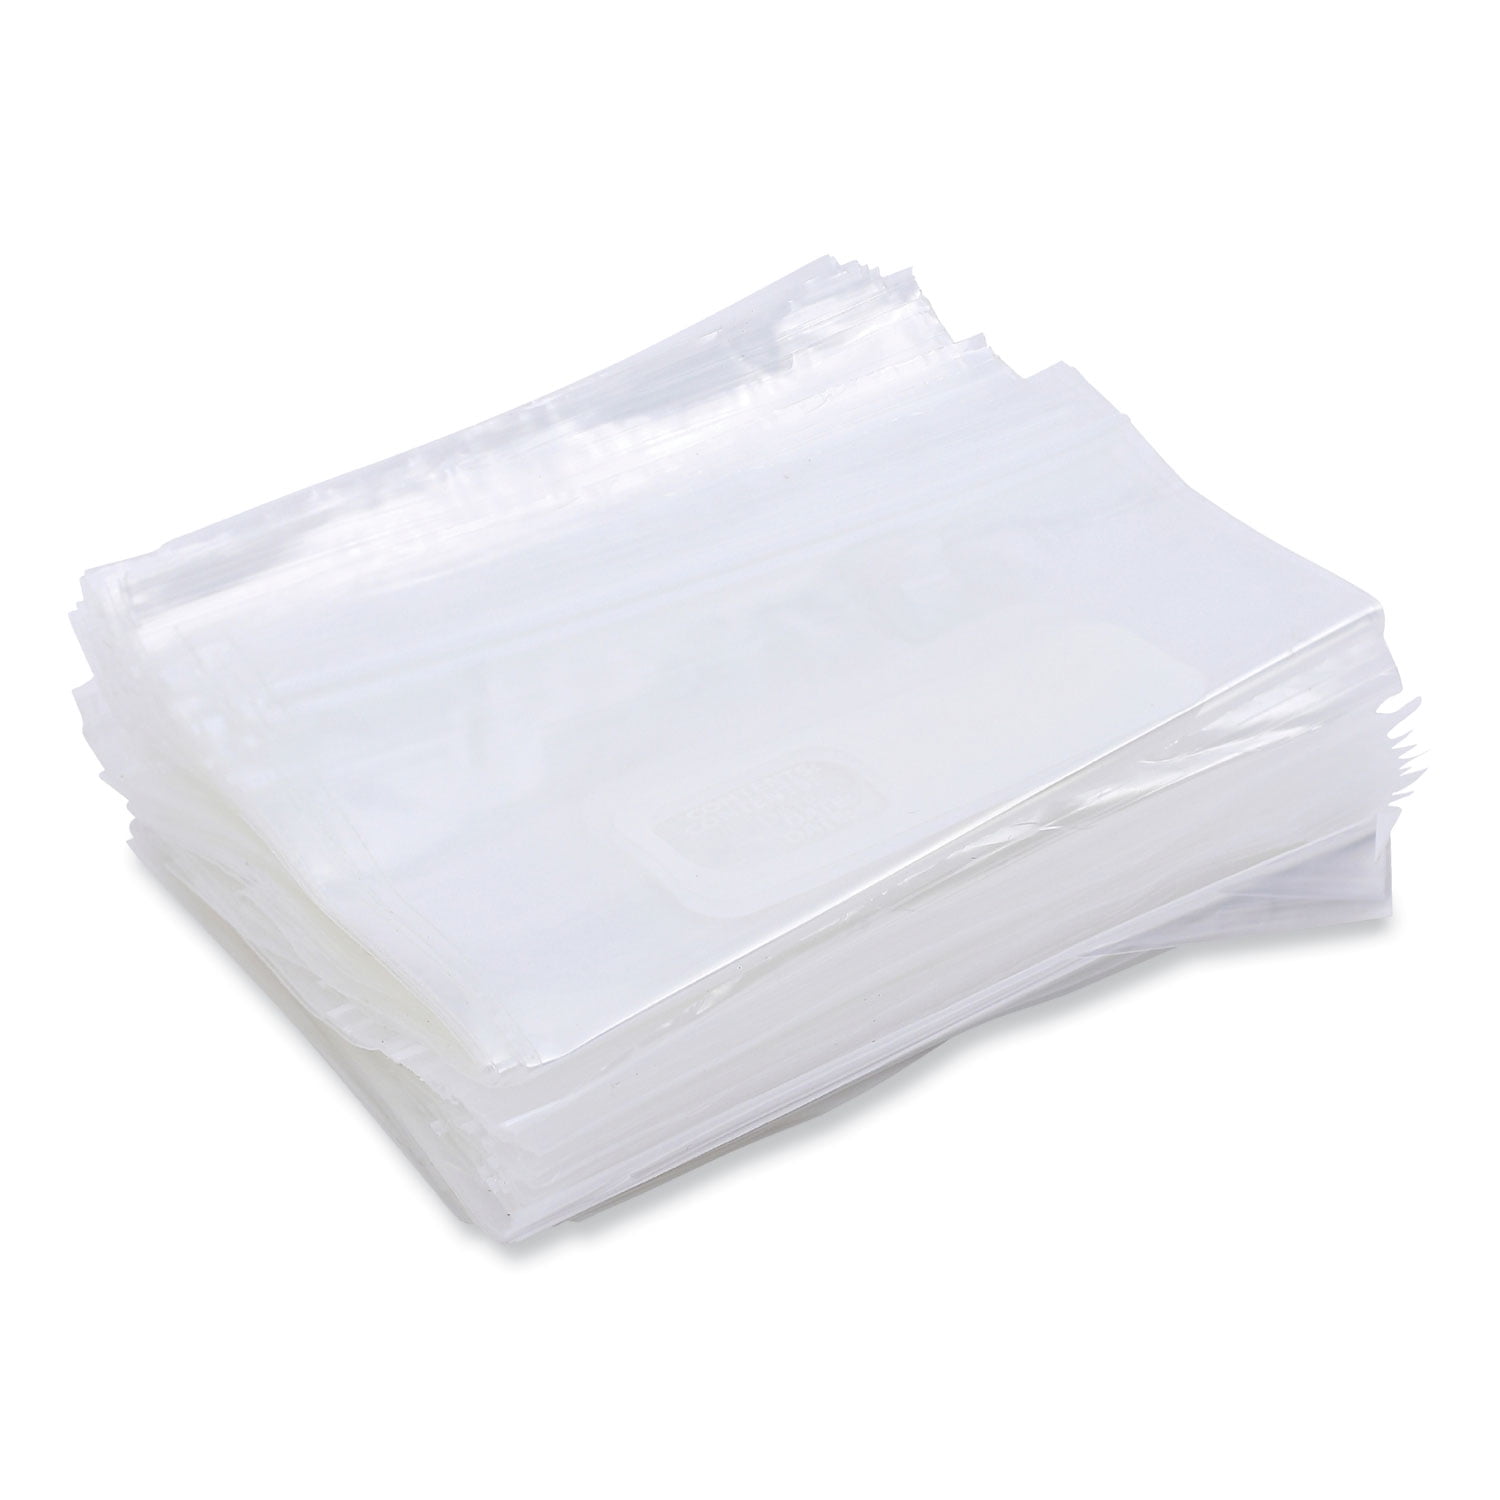 Ziploc Commercial Foodservice Storage Bags 1 Gal. 1.75 mil 10-9/16 in. x  10-3/4 in. Write-On Panel (250 Per Case) SJN682257 - The Home Depot